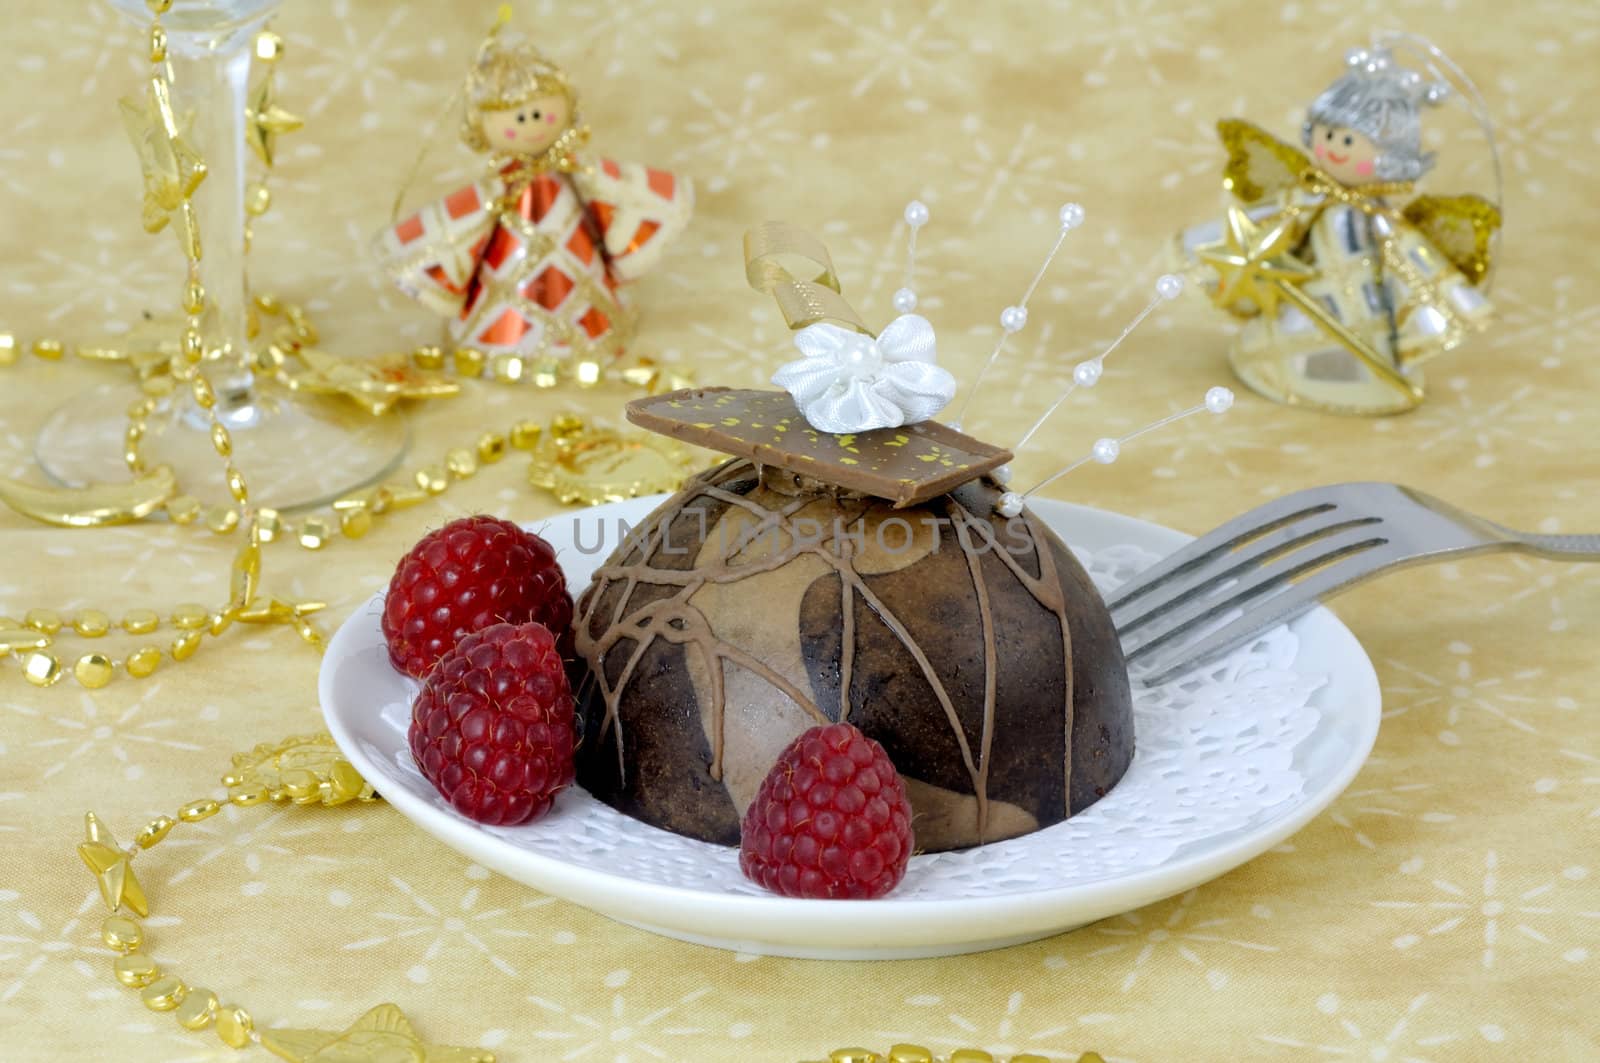 Festive chocolate dessert decorated with raspberries on a plate with paper doily